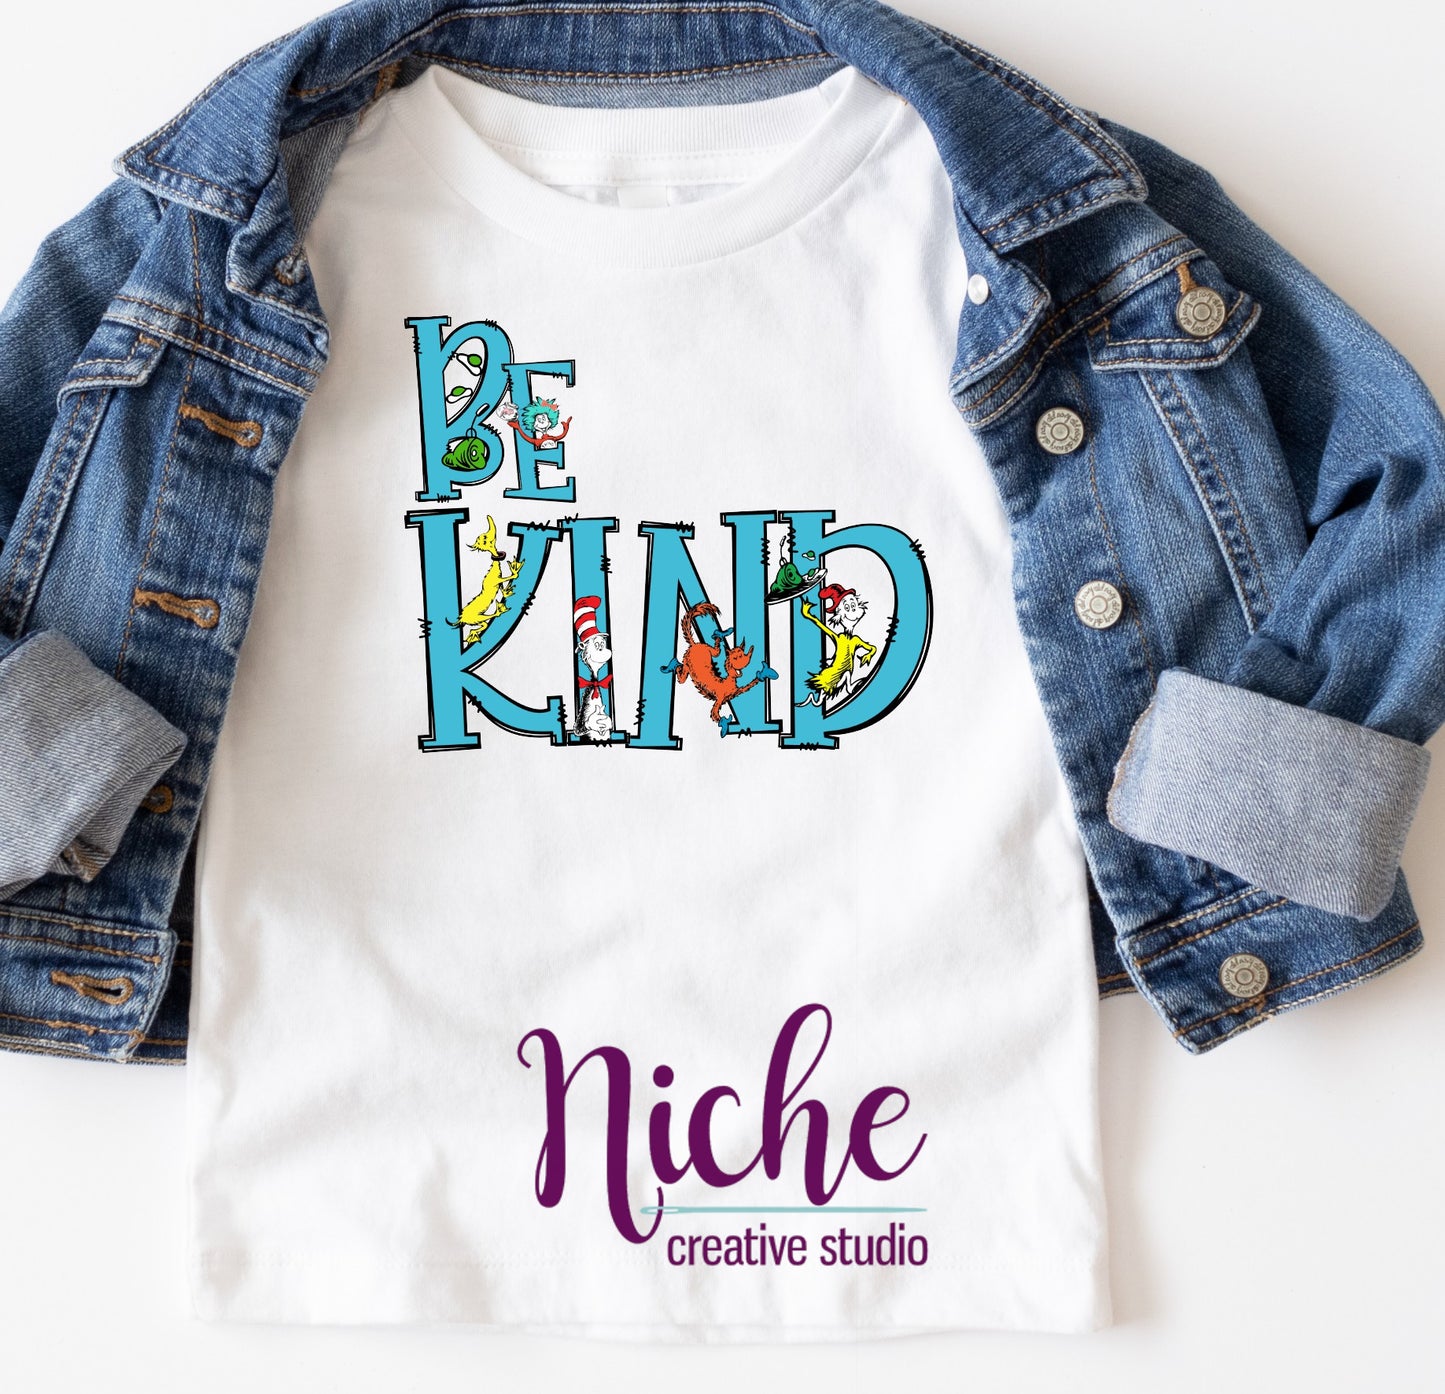 -DRS1345 Be Kind Dr Seuss Decal